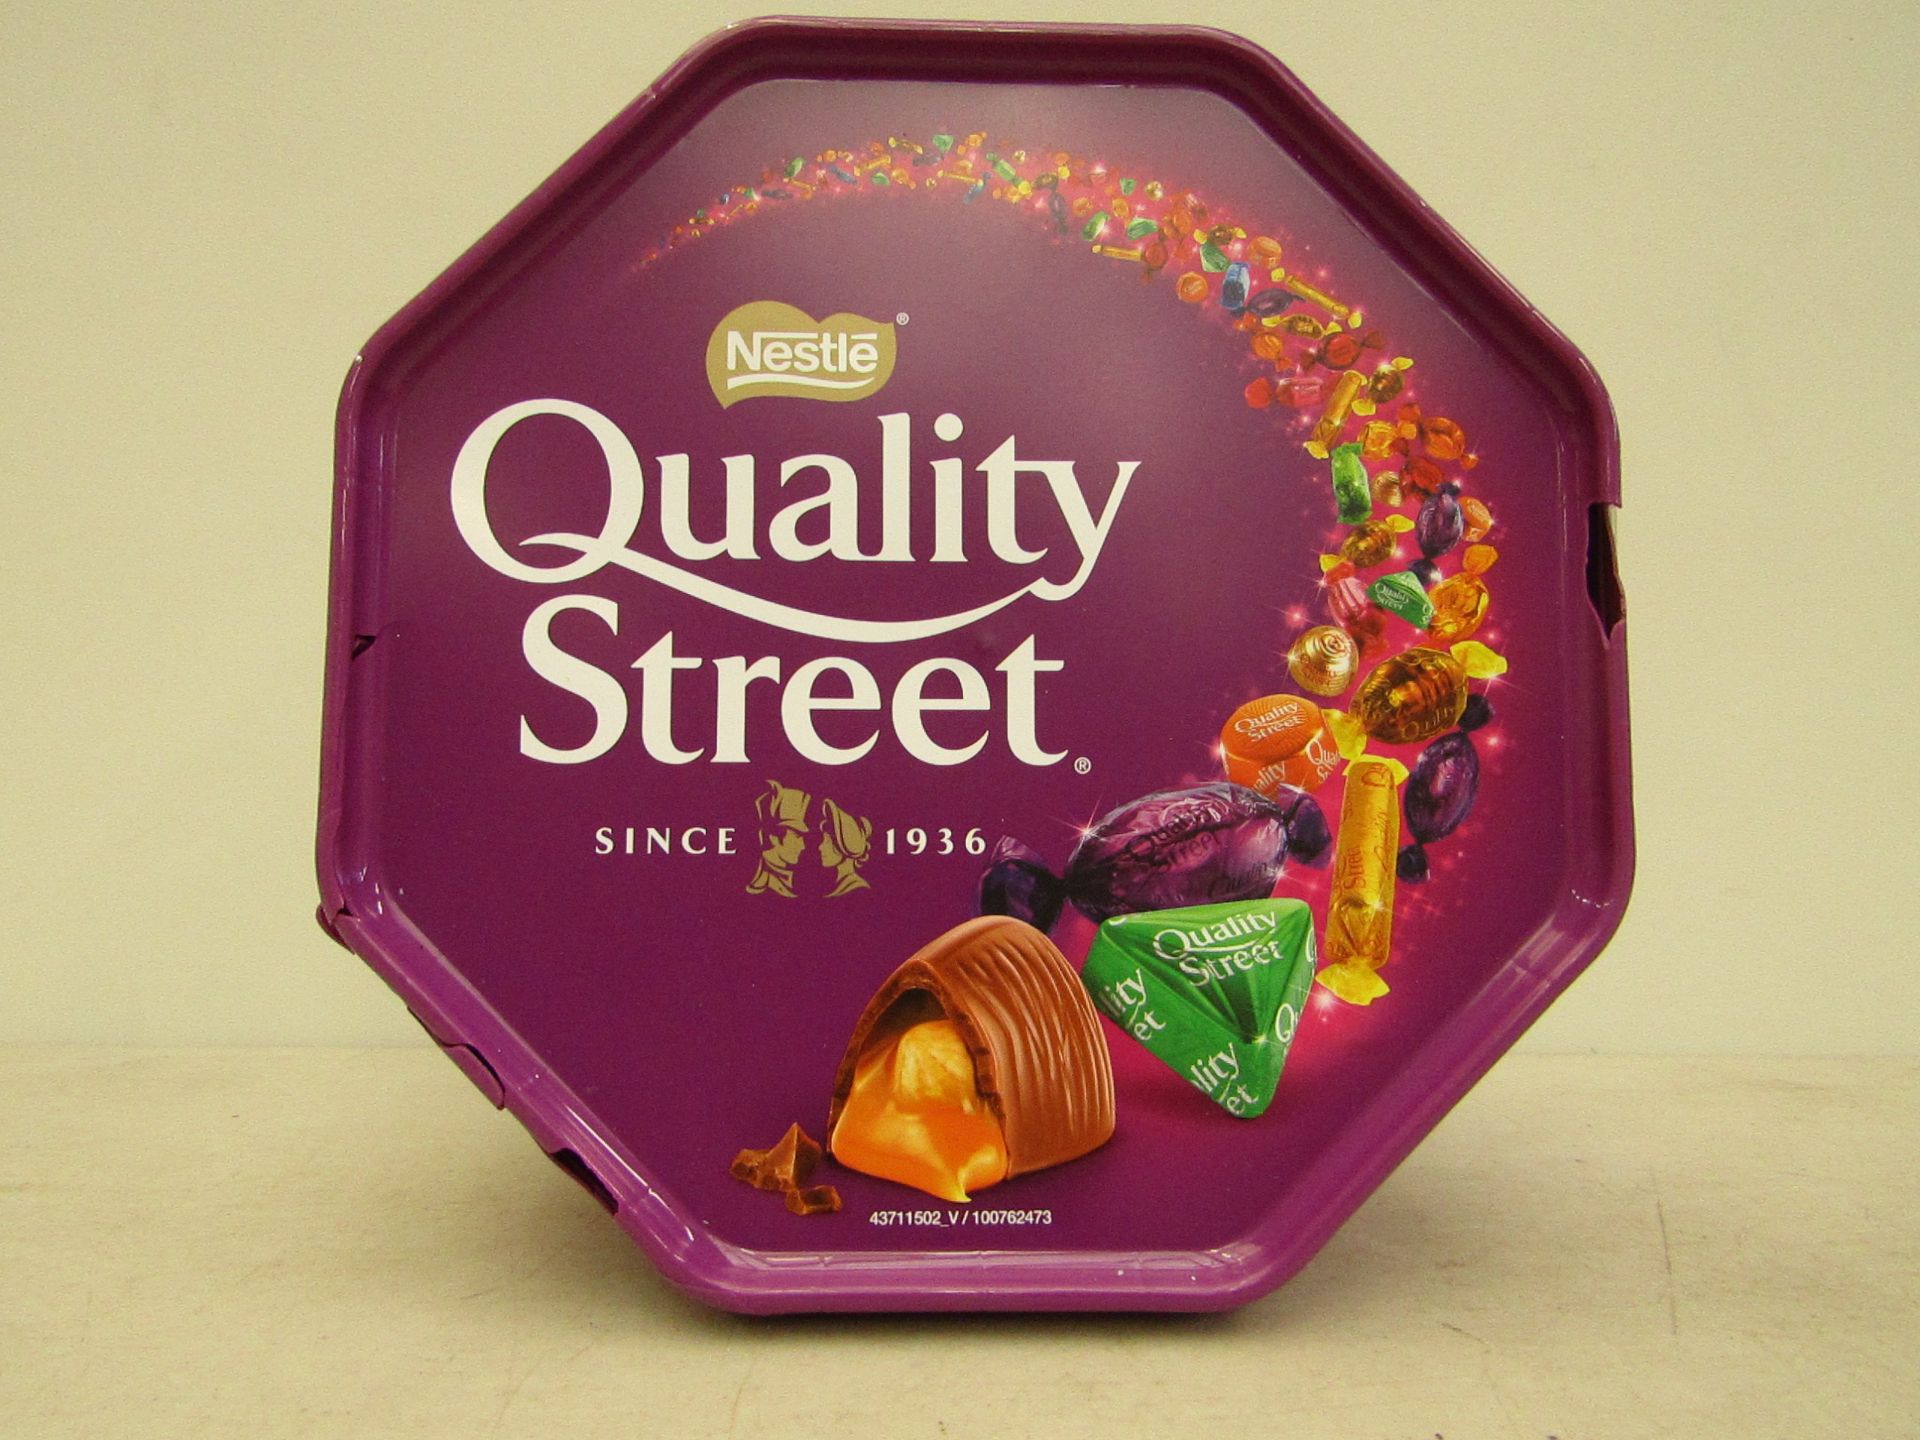 4x Boxes of Quality street 750g (3KG total), BB 04/2018. *Please note some of these boxes have been